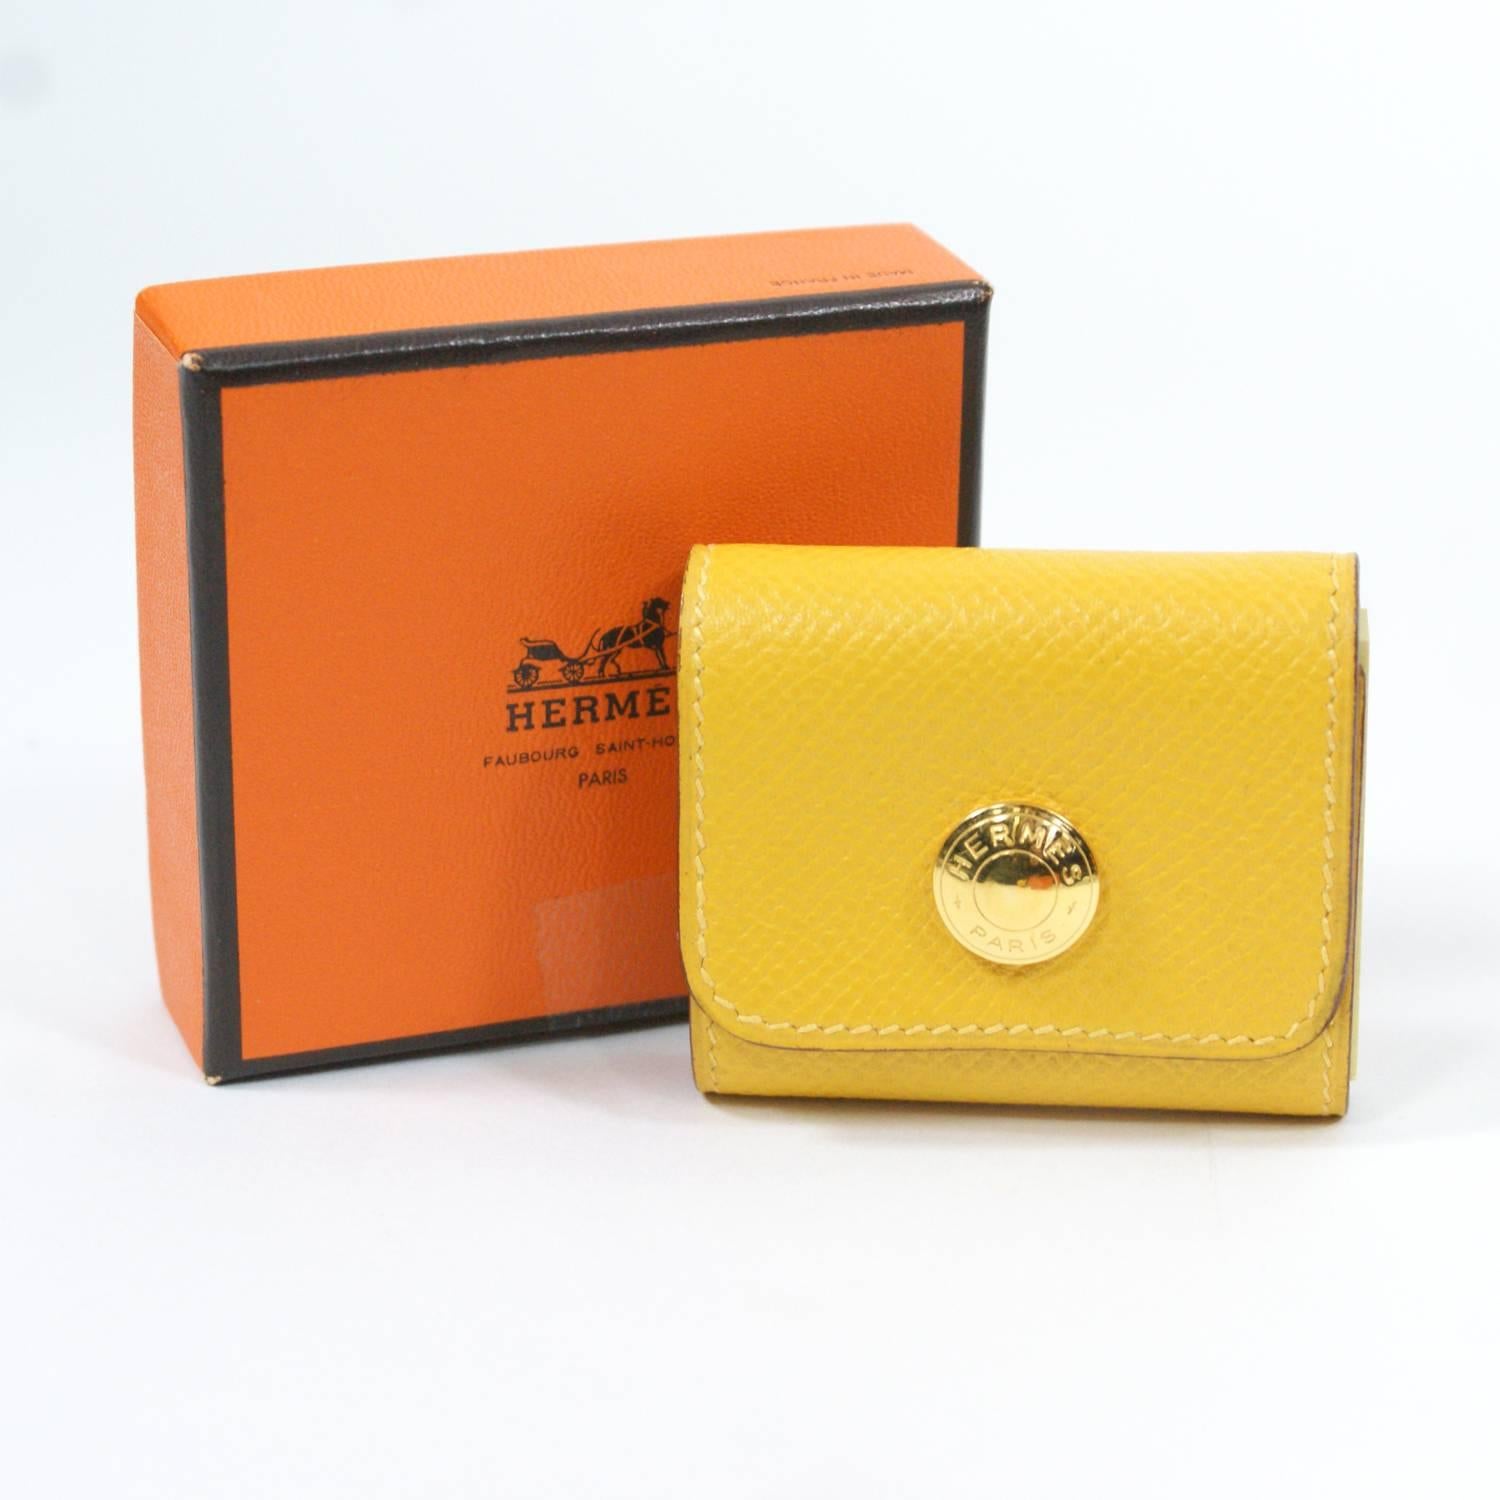 Mini note book case with post its
Gold tone hardware
Snap closure
